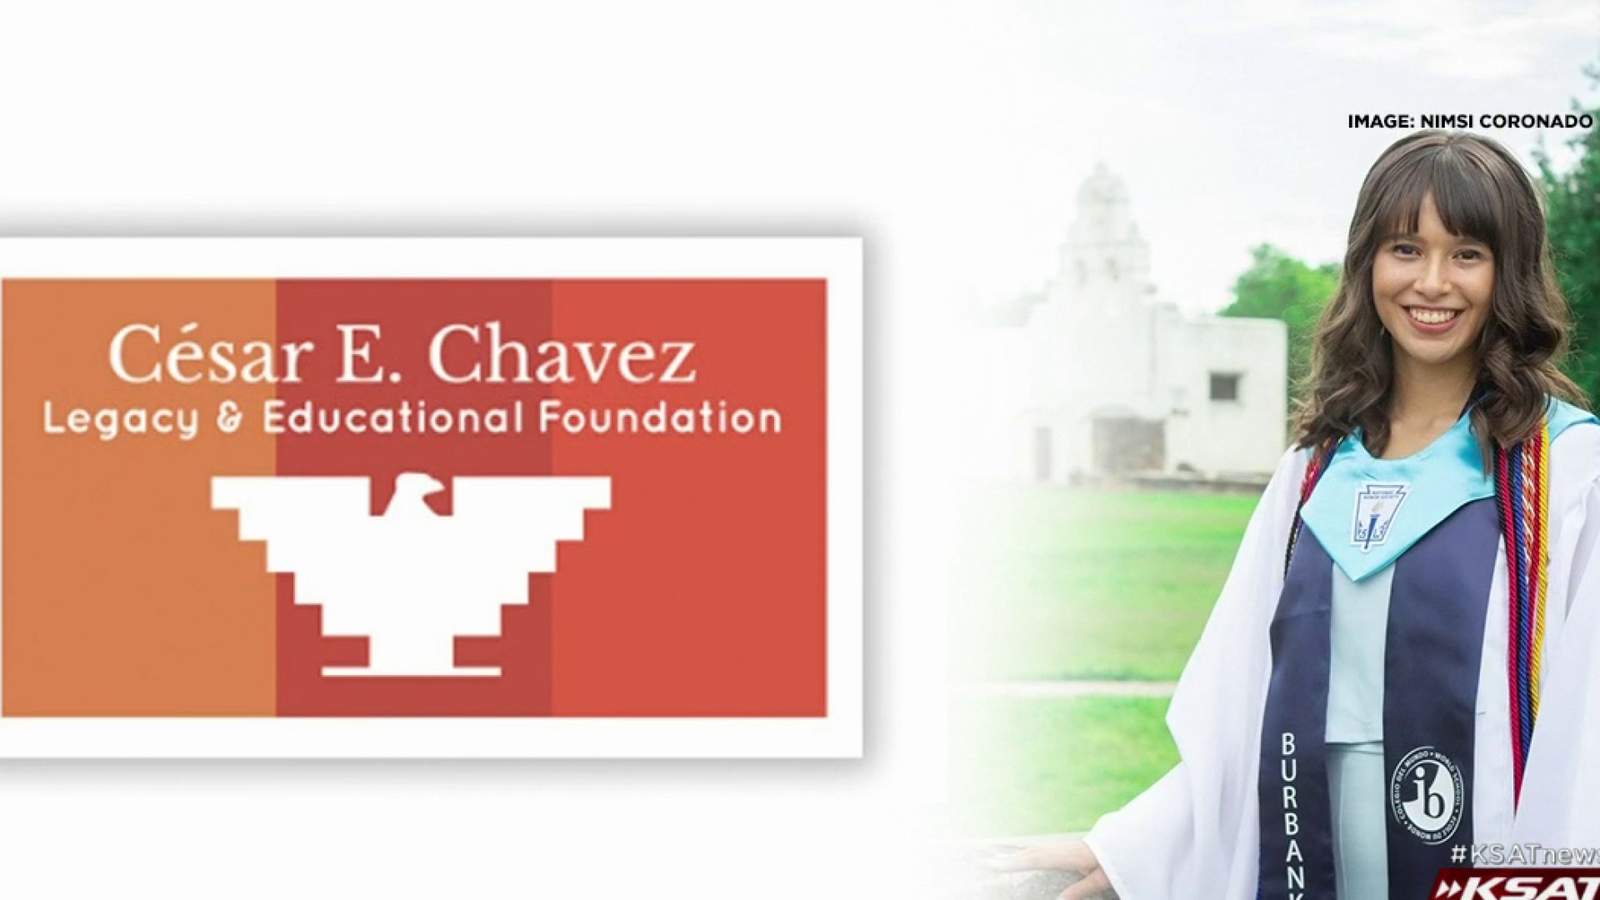 Fewer grads to get scholarships, laptops from foundation honoring Cesar Chavez due to COVID-19 fundraising slowdown